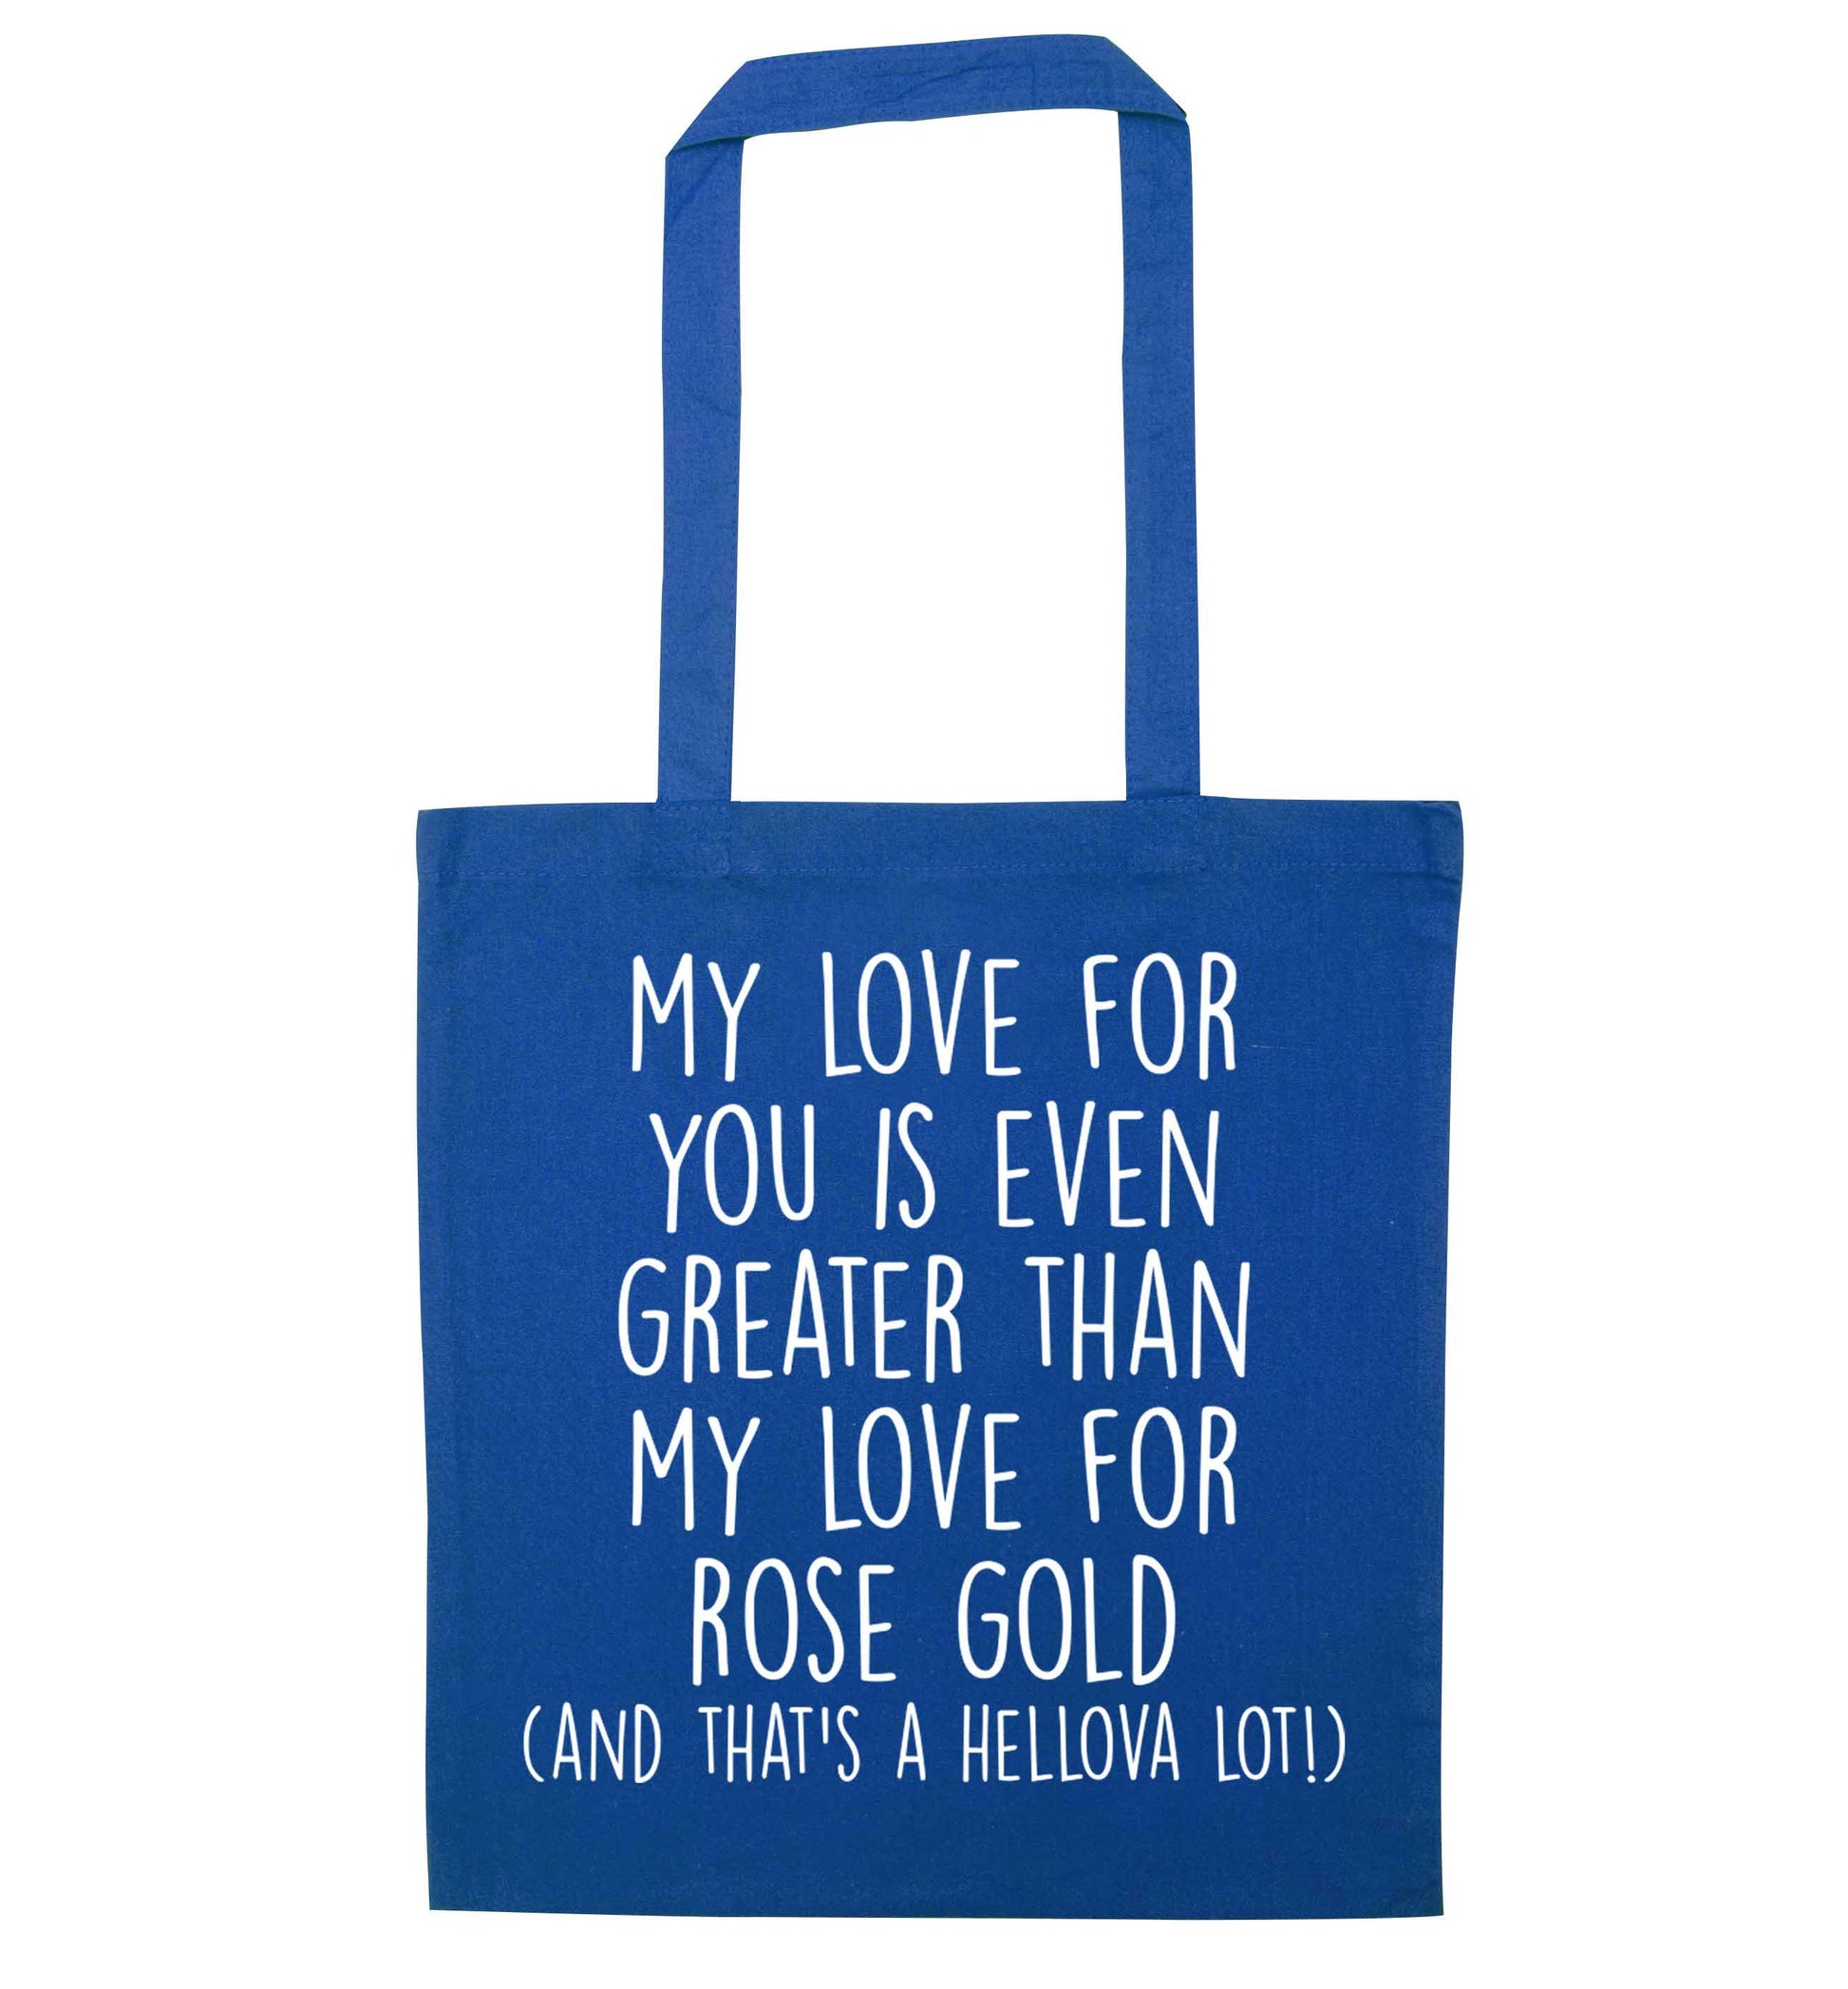 My love for you is even greater than my love for rose gold (and that's a hellova lot) blue tote bag